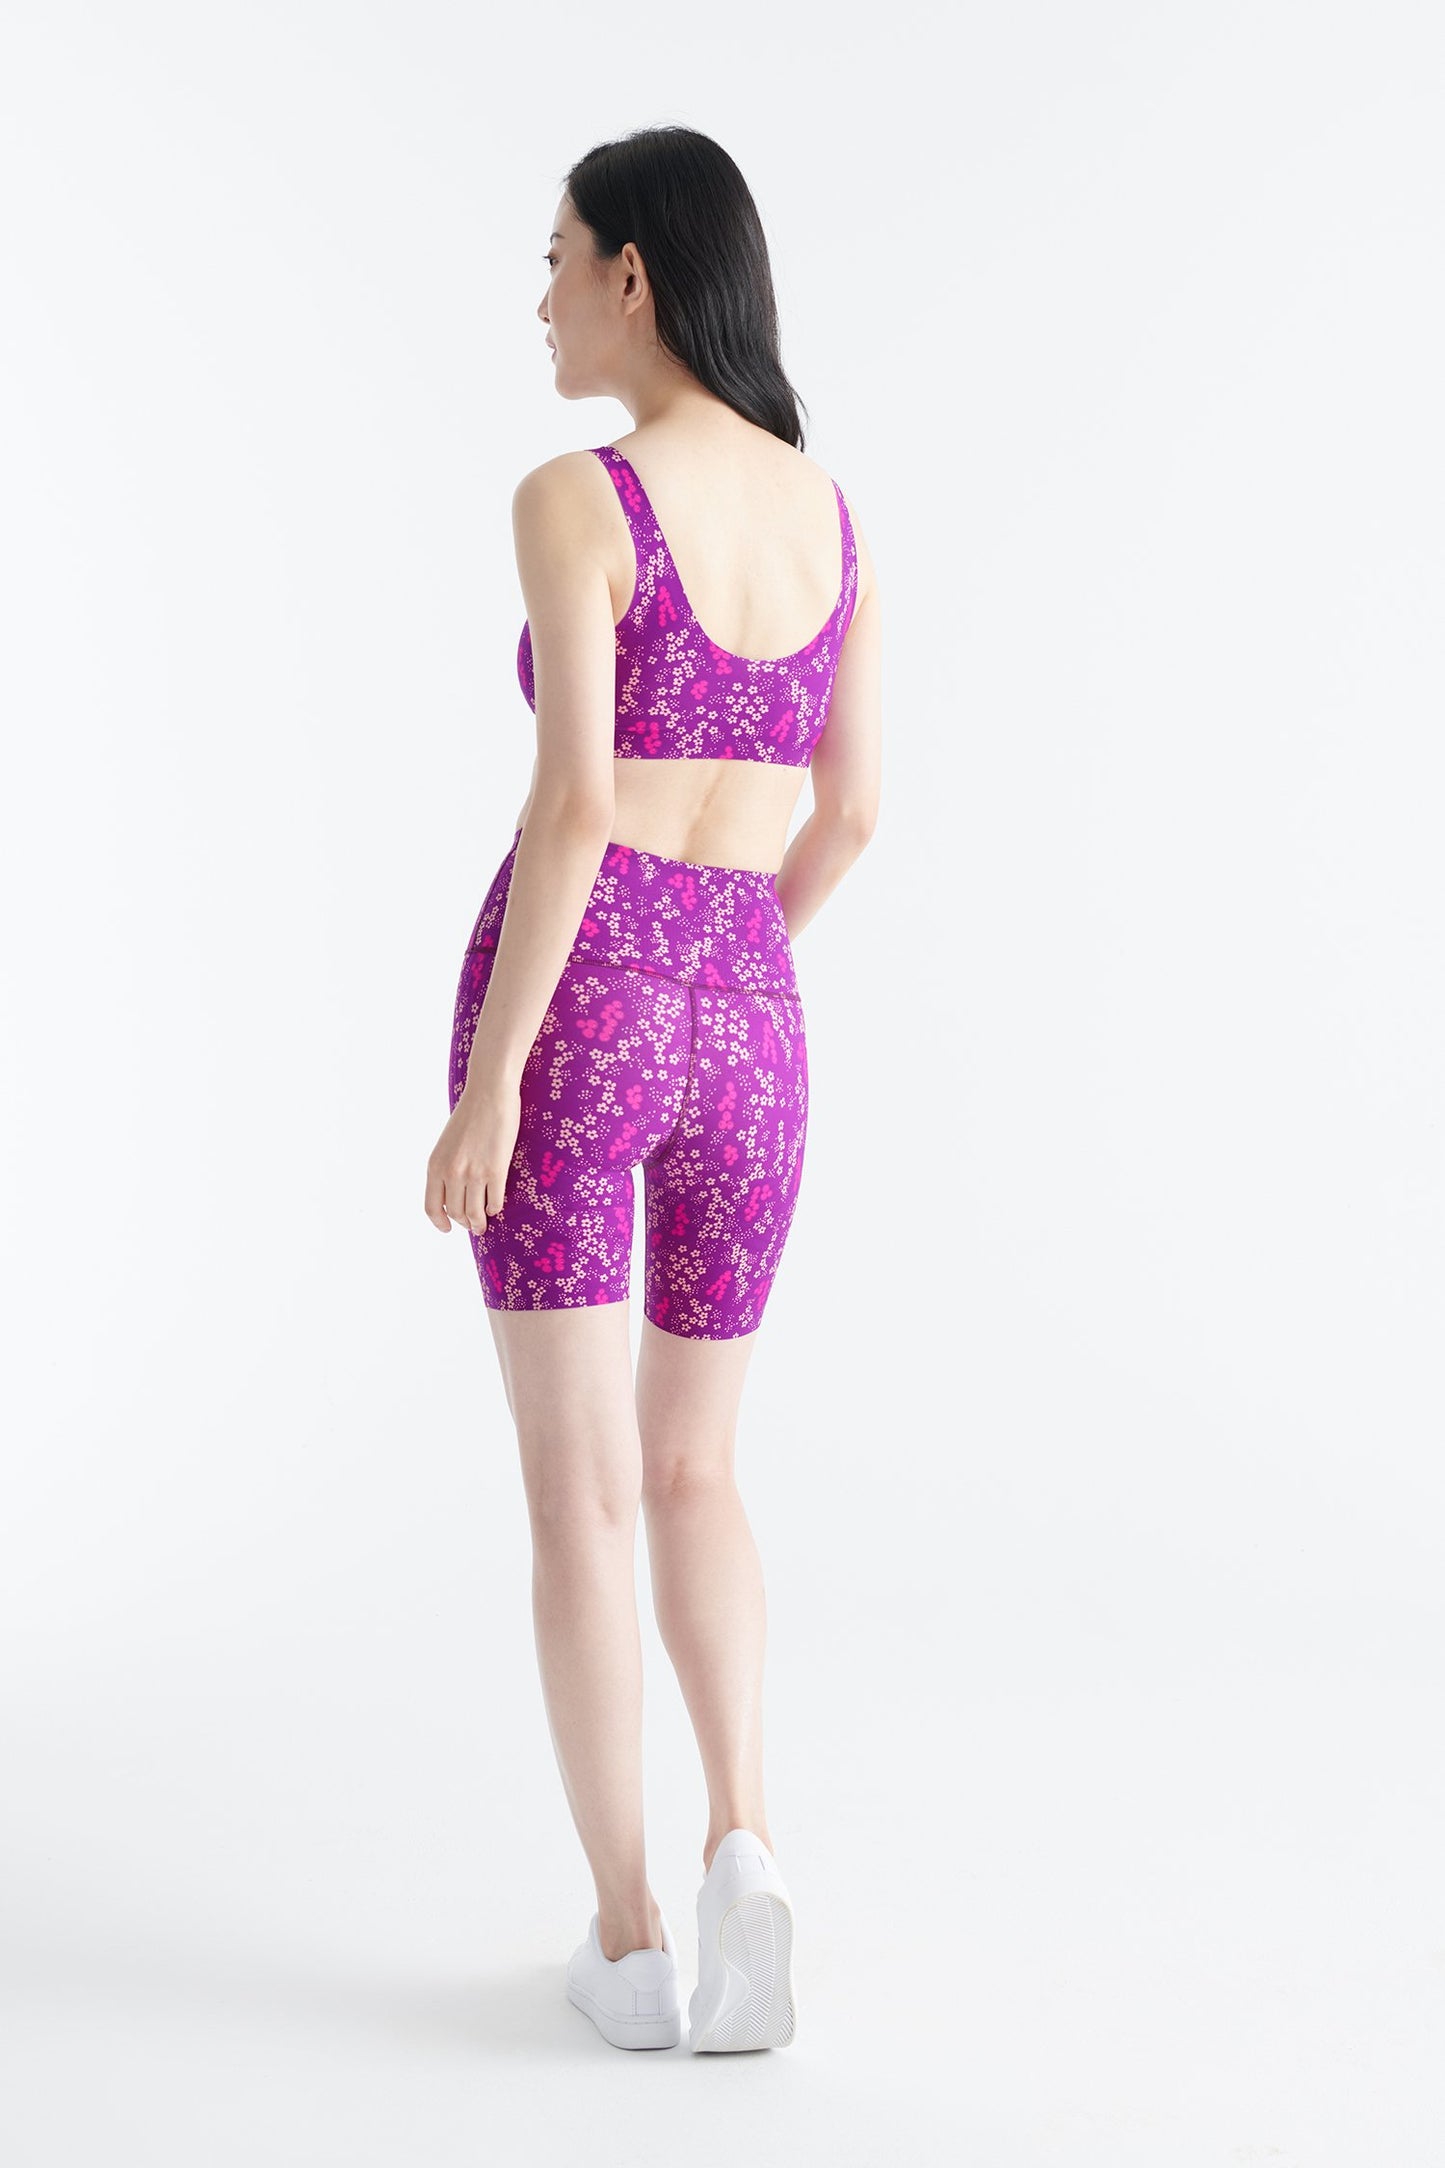 Anna Sui x Knix Ditsy Blooms Essential Technical Short is like a second skin for your body